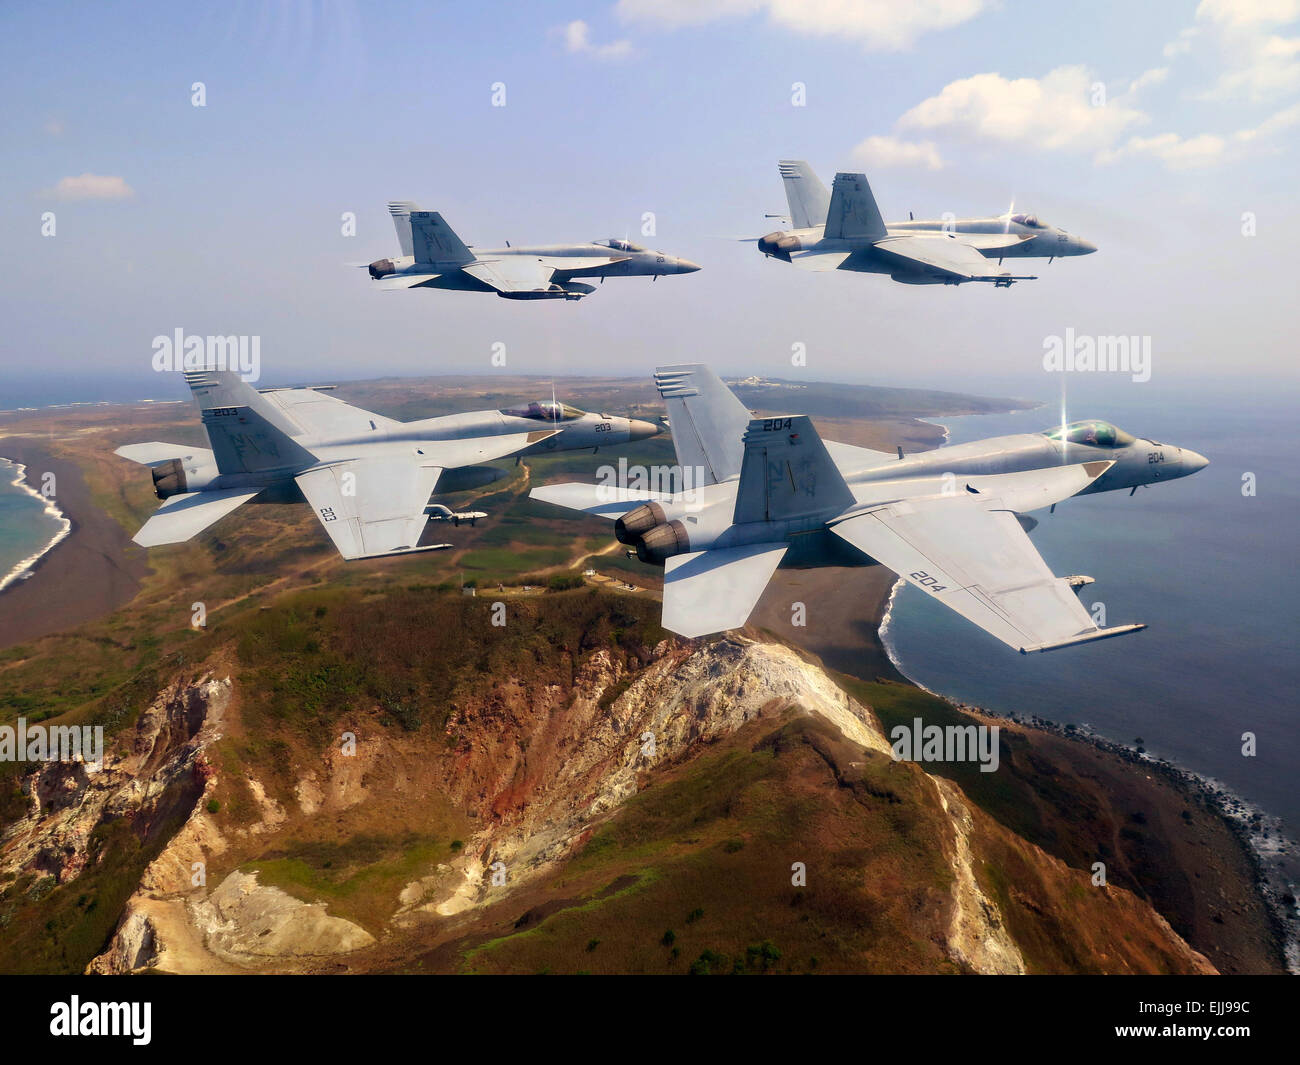 US Navy F/A-18E Super Hornet fighter aircraft fly in formation over Mt. Suribachi in honor of the 70th anniversary of the Battle of Iwo Jima March 25, 2015 in Iwo Jima Island, Japan. Stock Photo